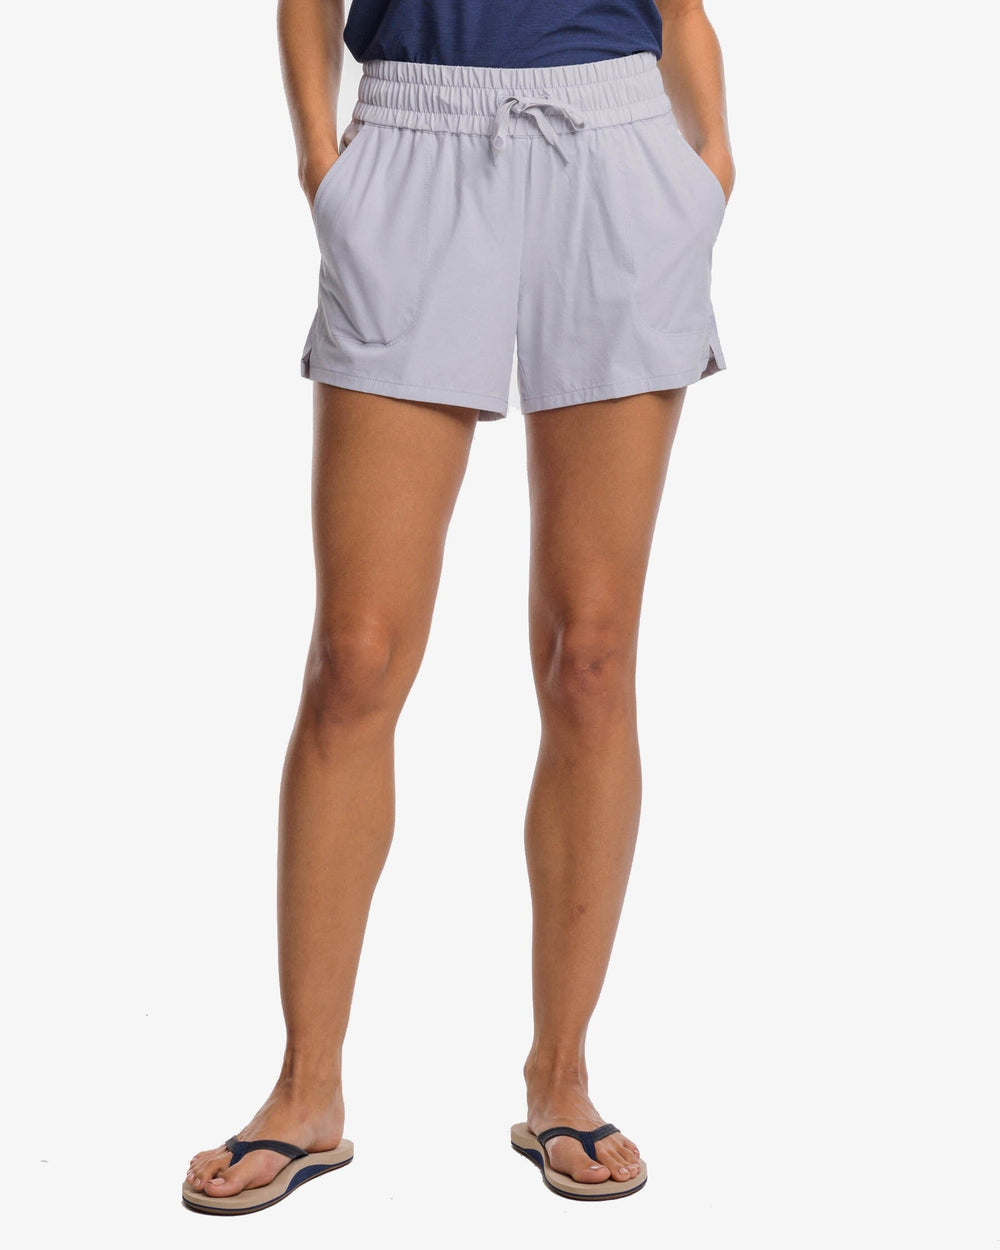 The front view of the Southern Tide Neeley brrr Performance Short by Southern Tide - Platinum Grey